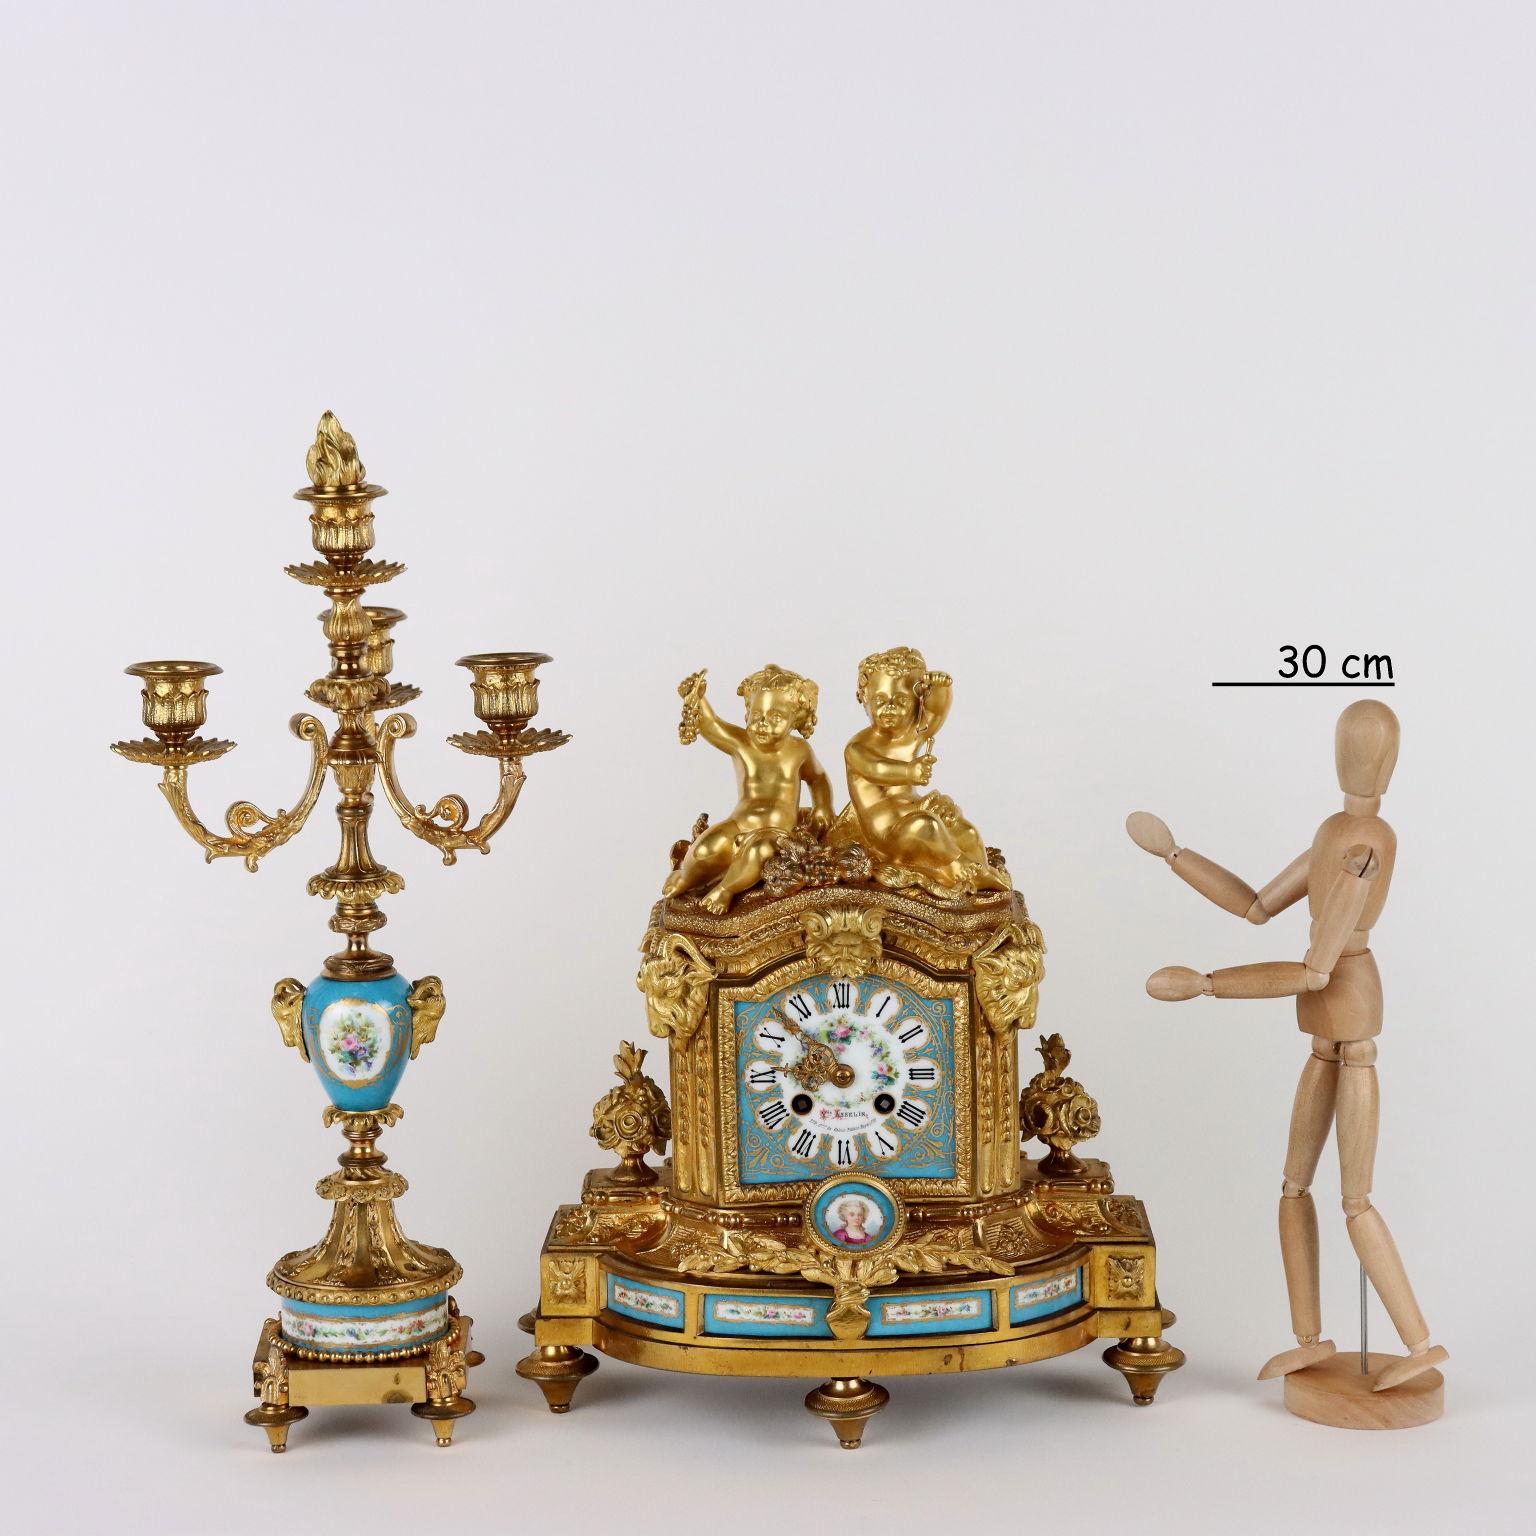 Triptych clock in gilded bronze with finely painted porcelain inserts with compositions of flowers, panoplies, cherubs and bust of a woman inside a medallion. The clock has a gilded and chiseled bronze base with plant motifs decorations, a pair of